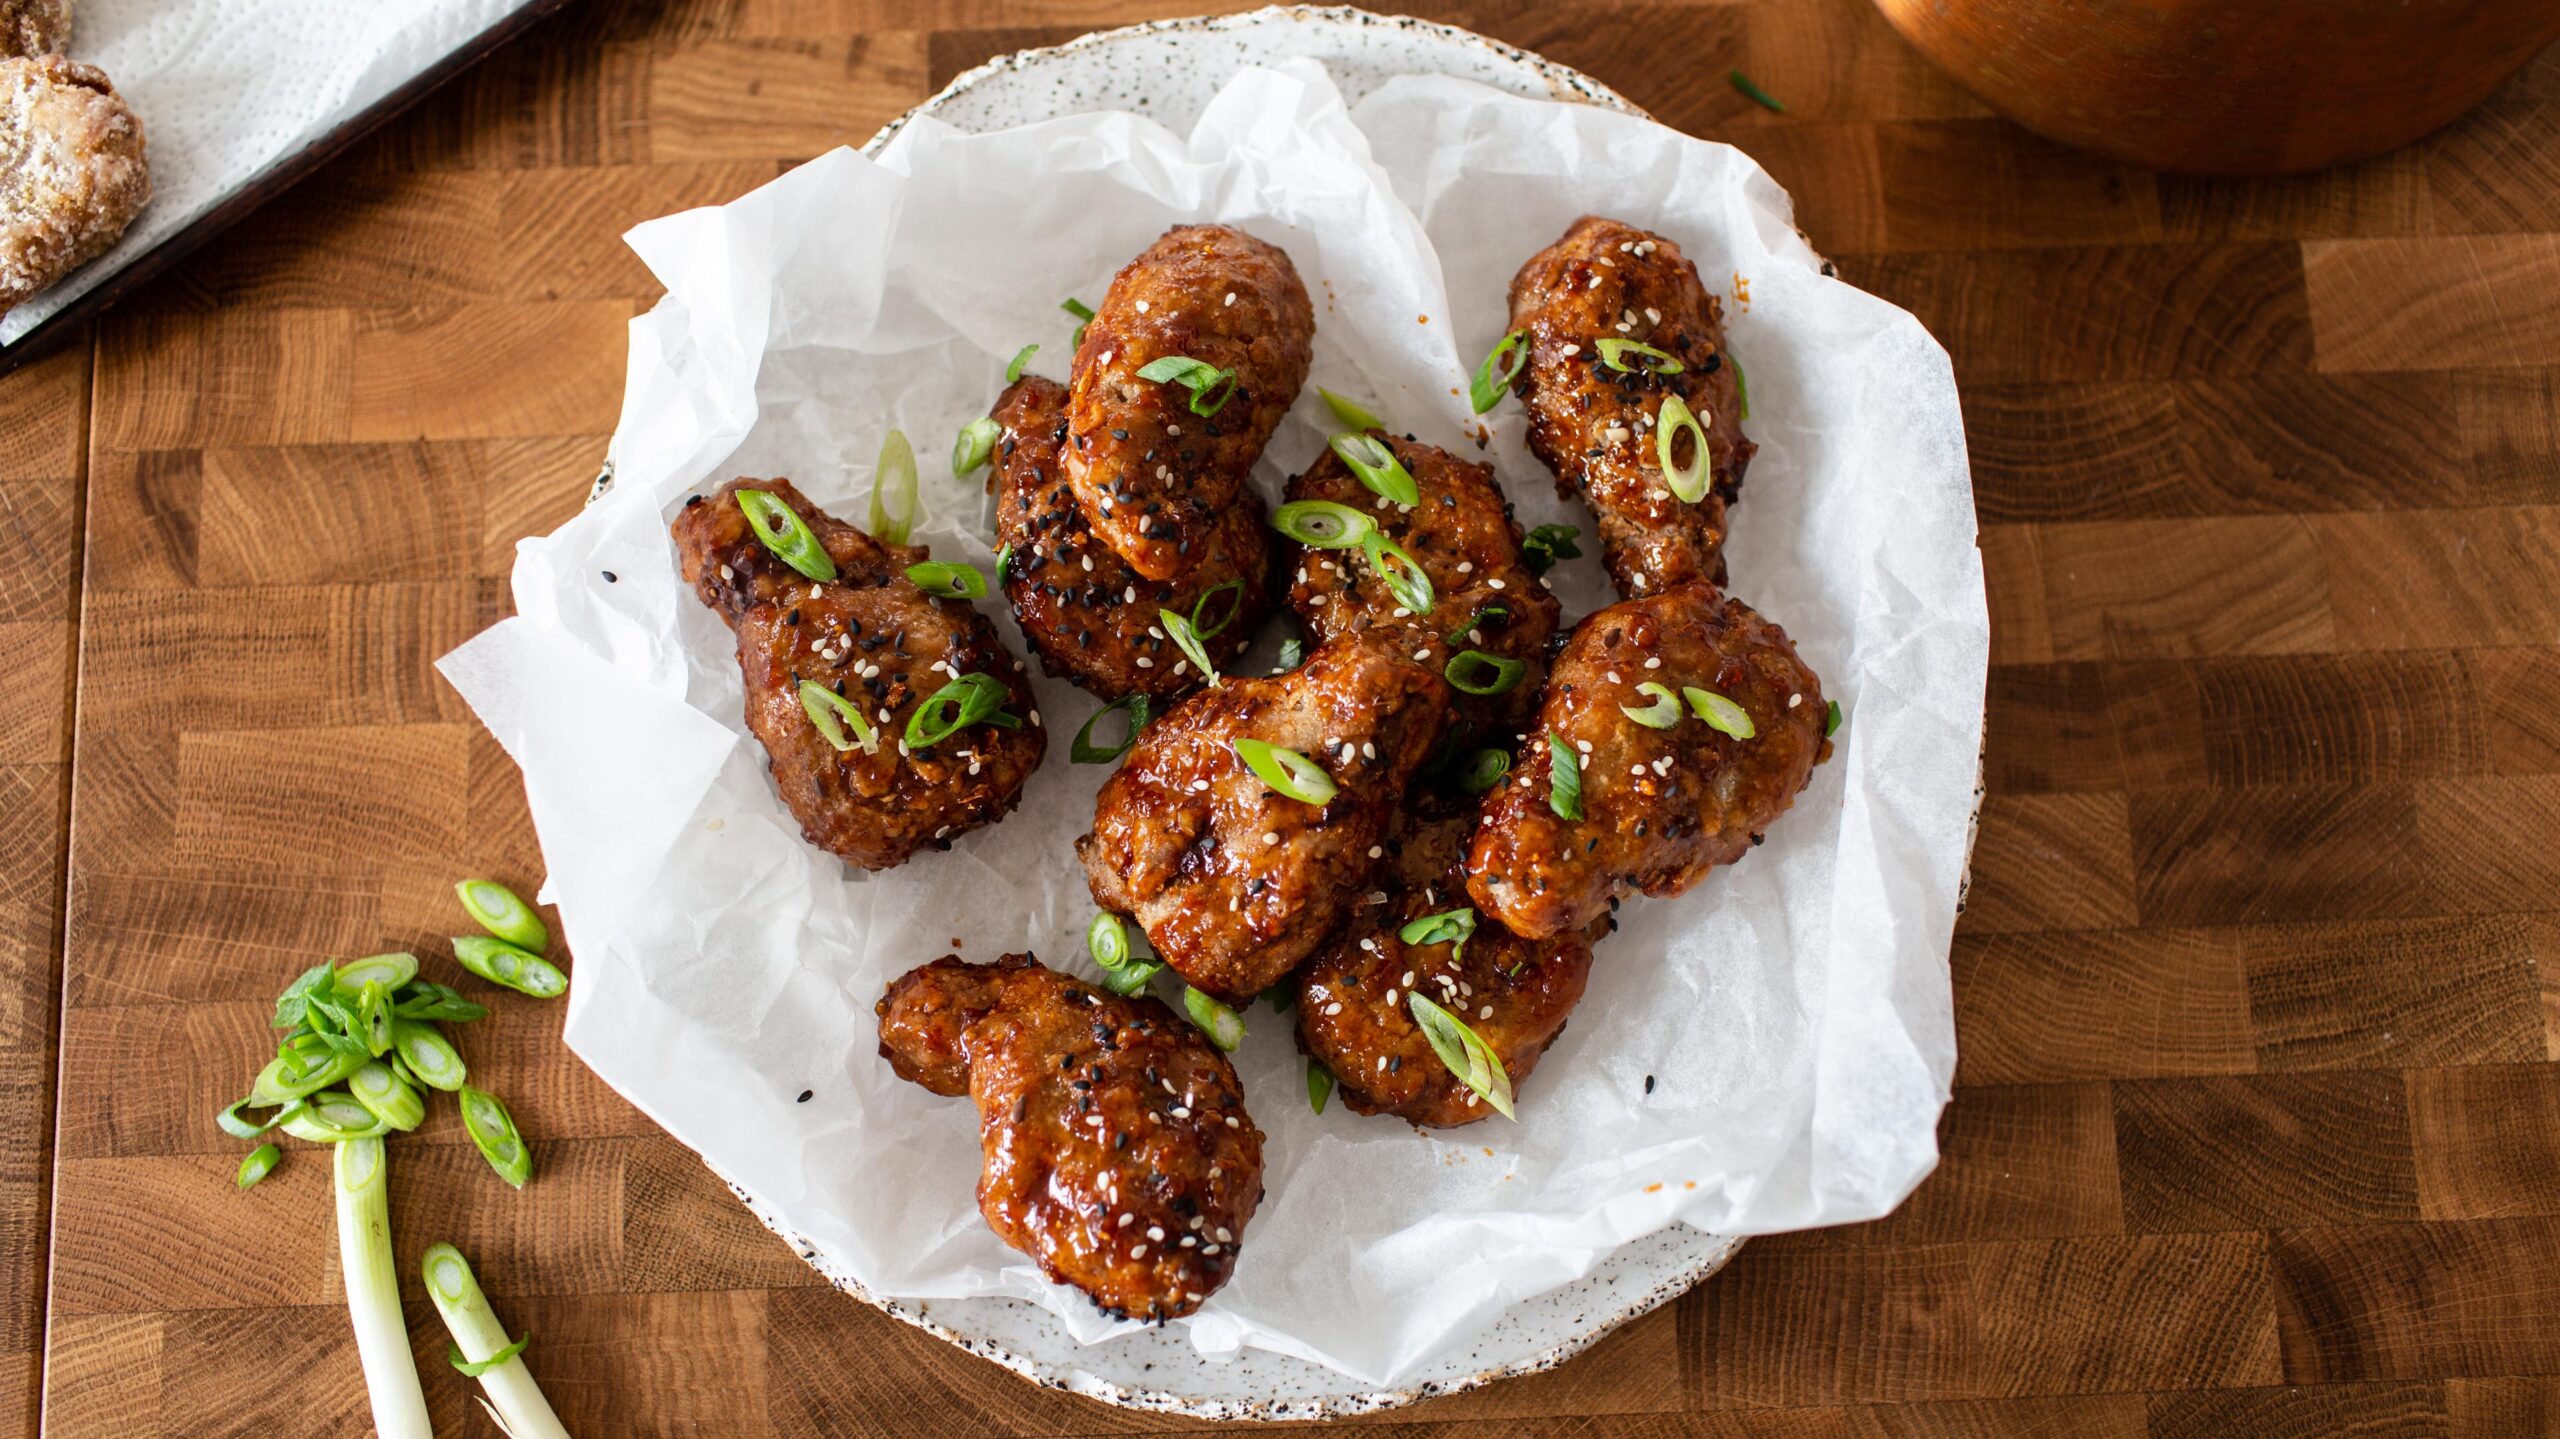  Bite into the perfect crunch of these vegan Korean fried “chicken” wings!